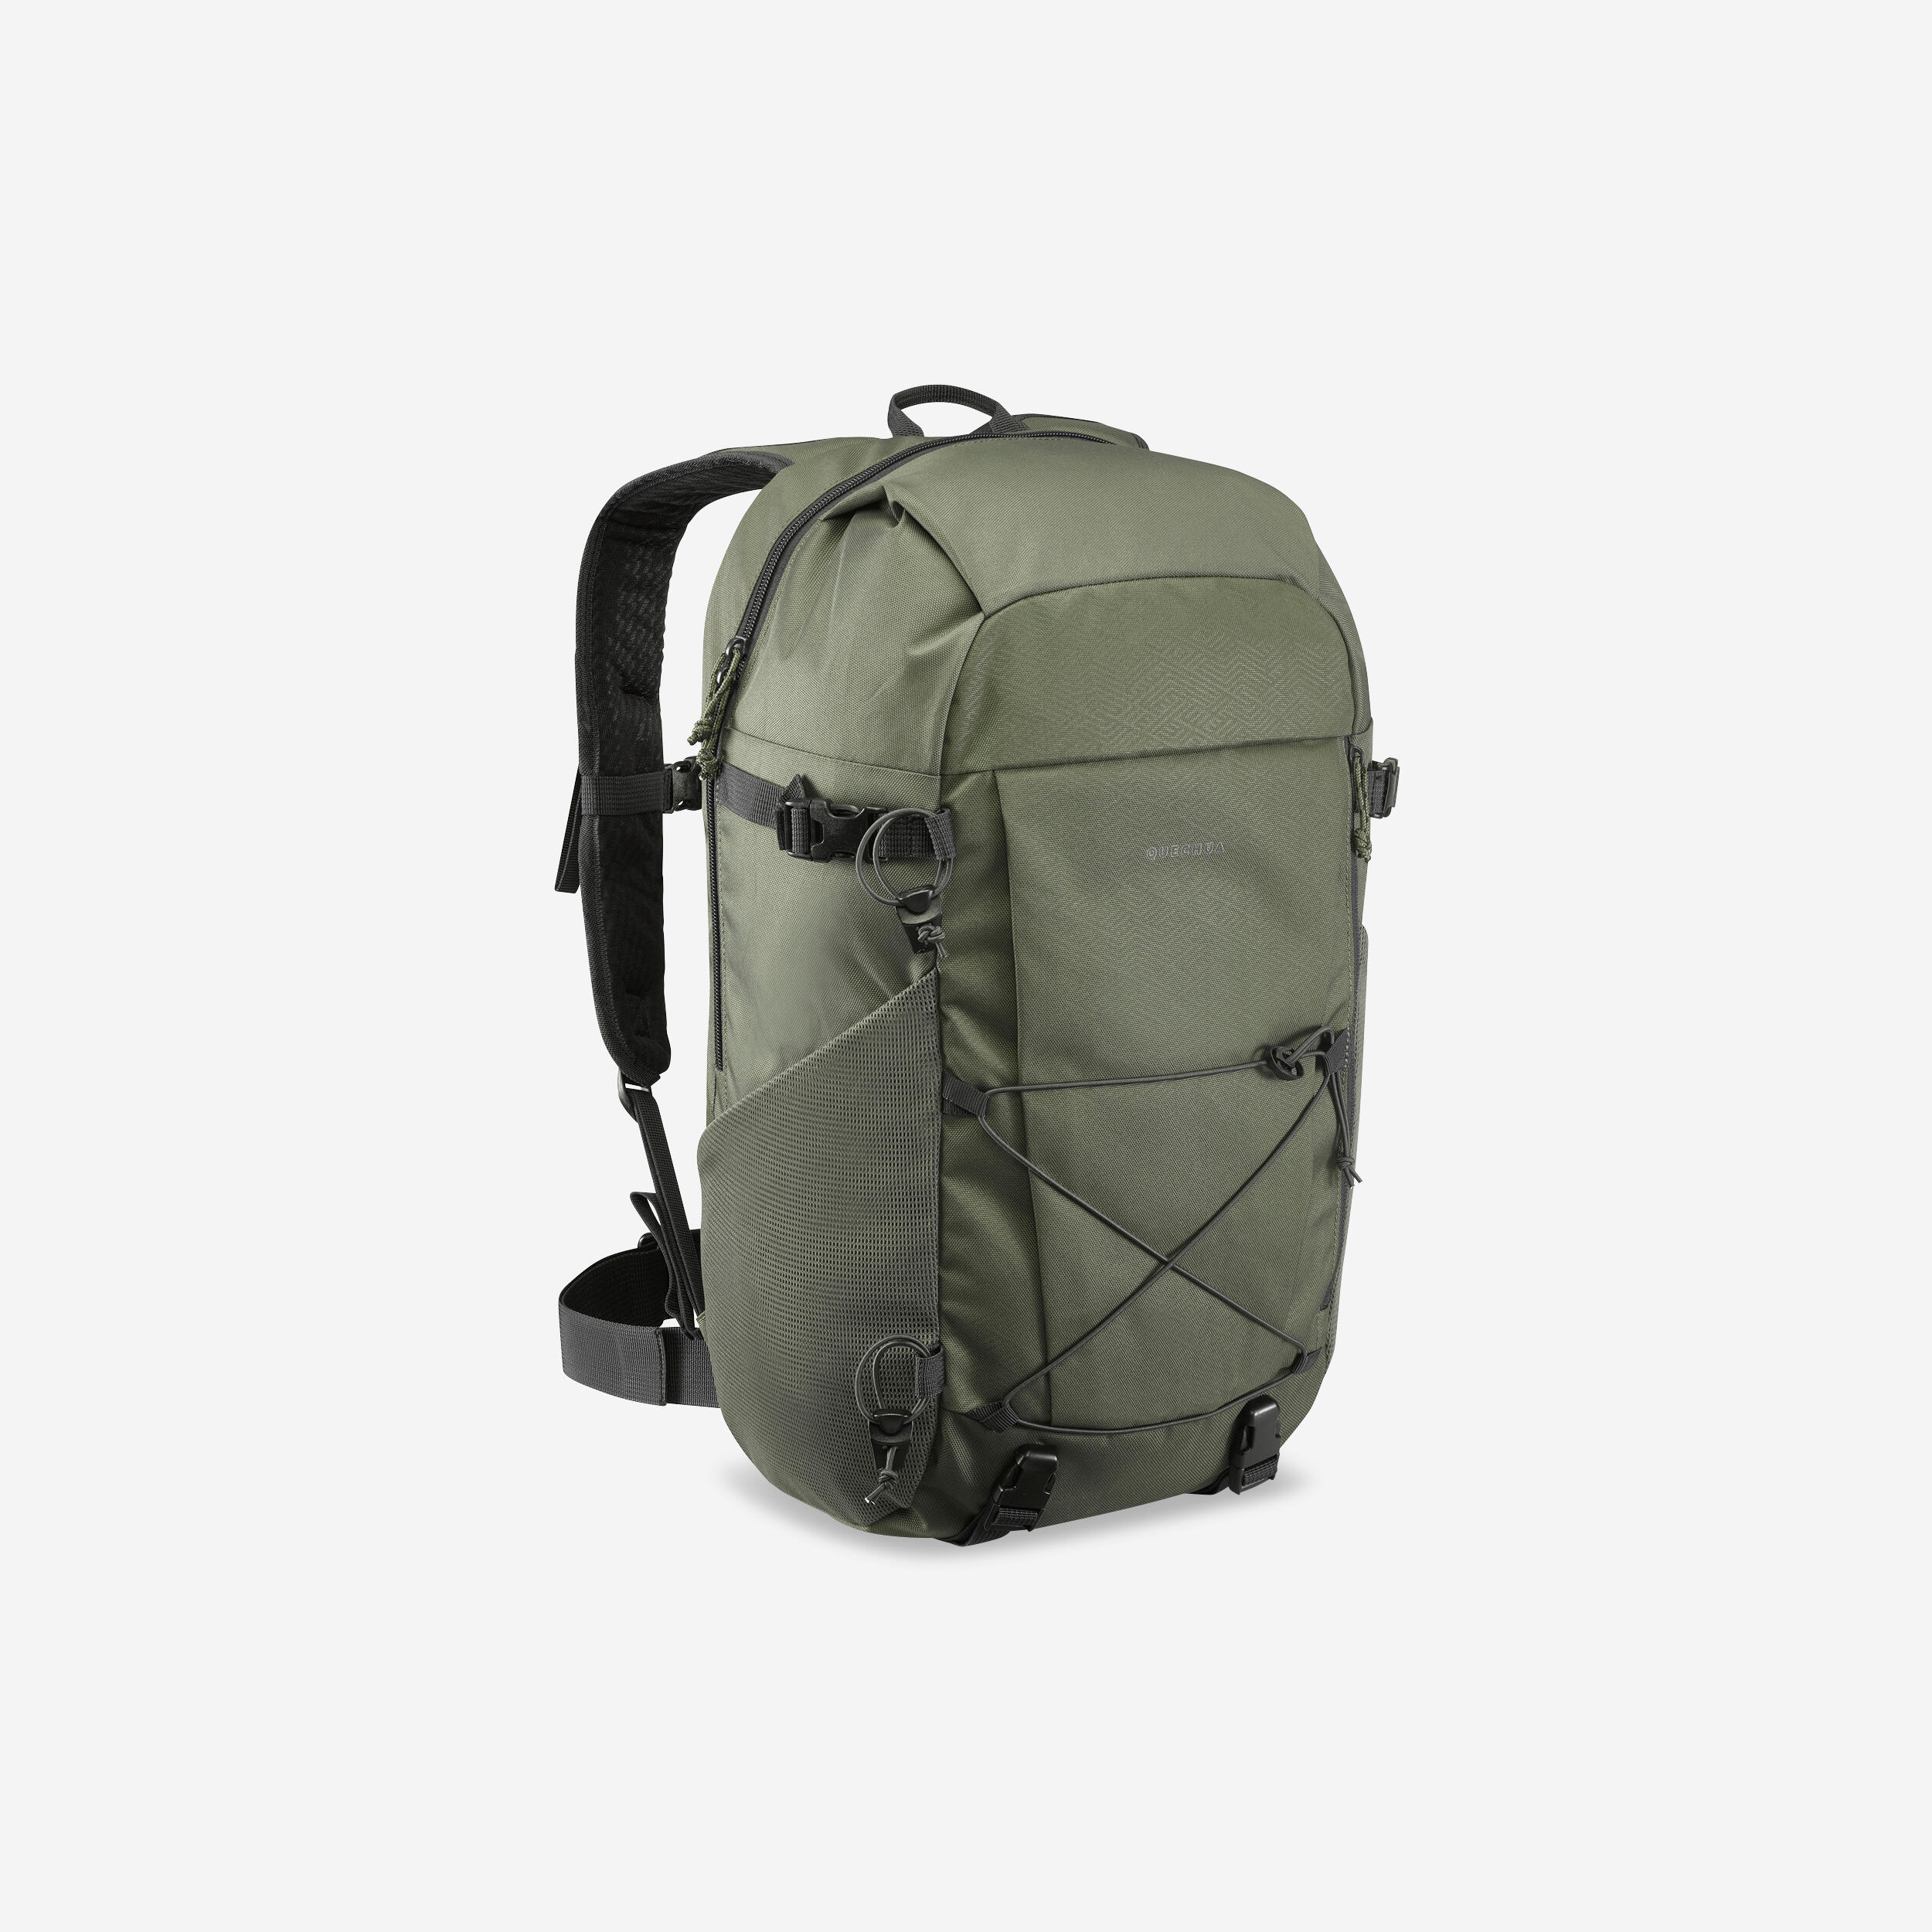 QUECHUA Hiking backpack 30L - NH Arpenaz 100